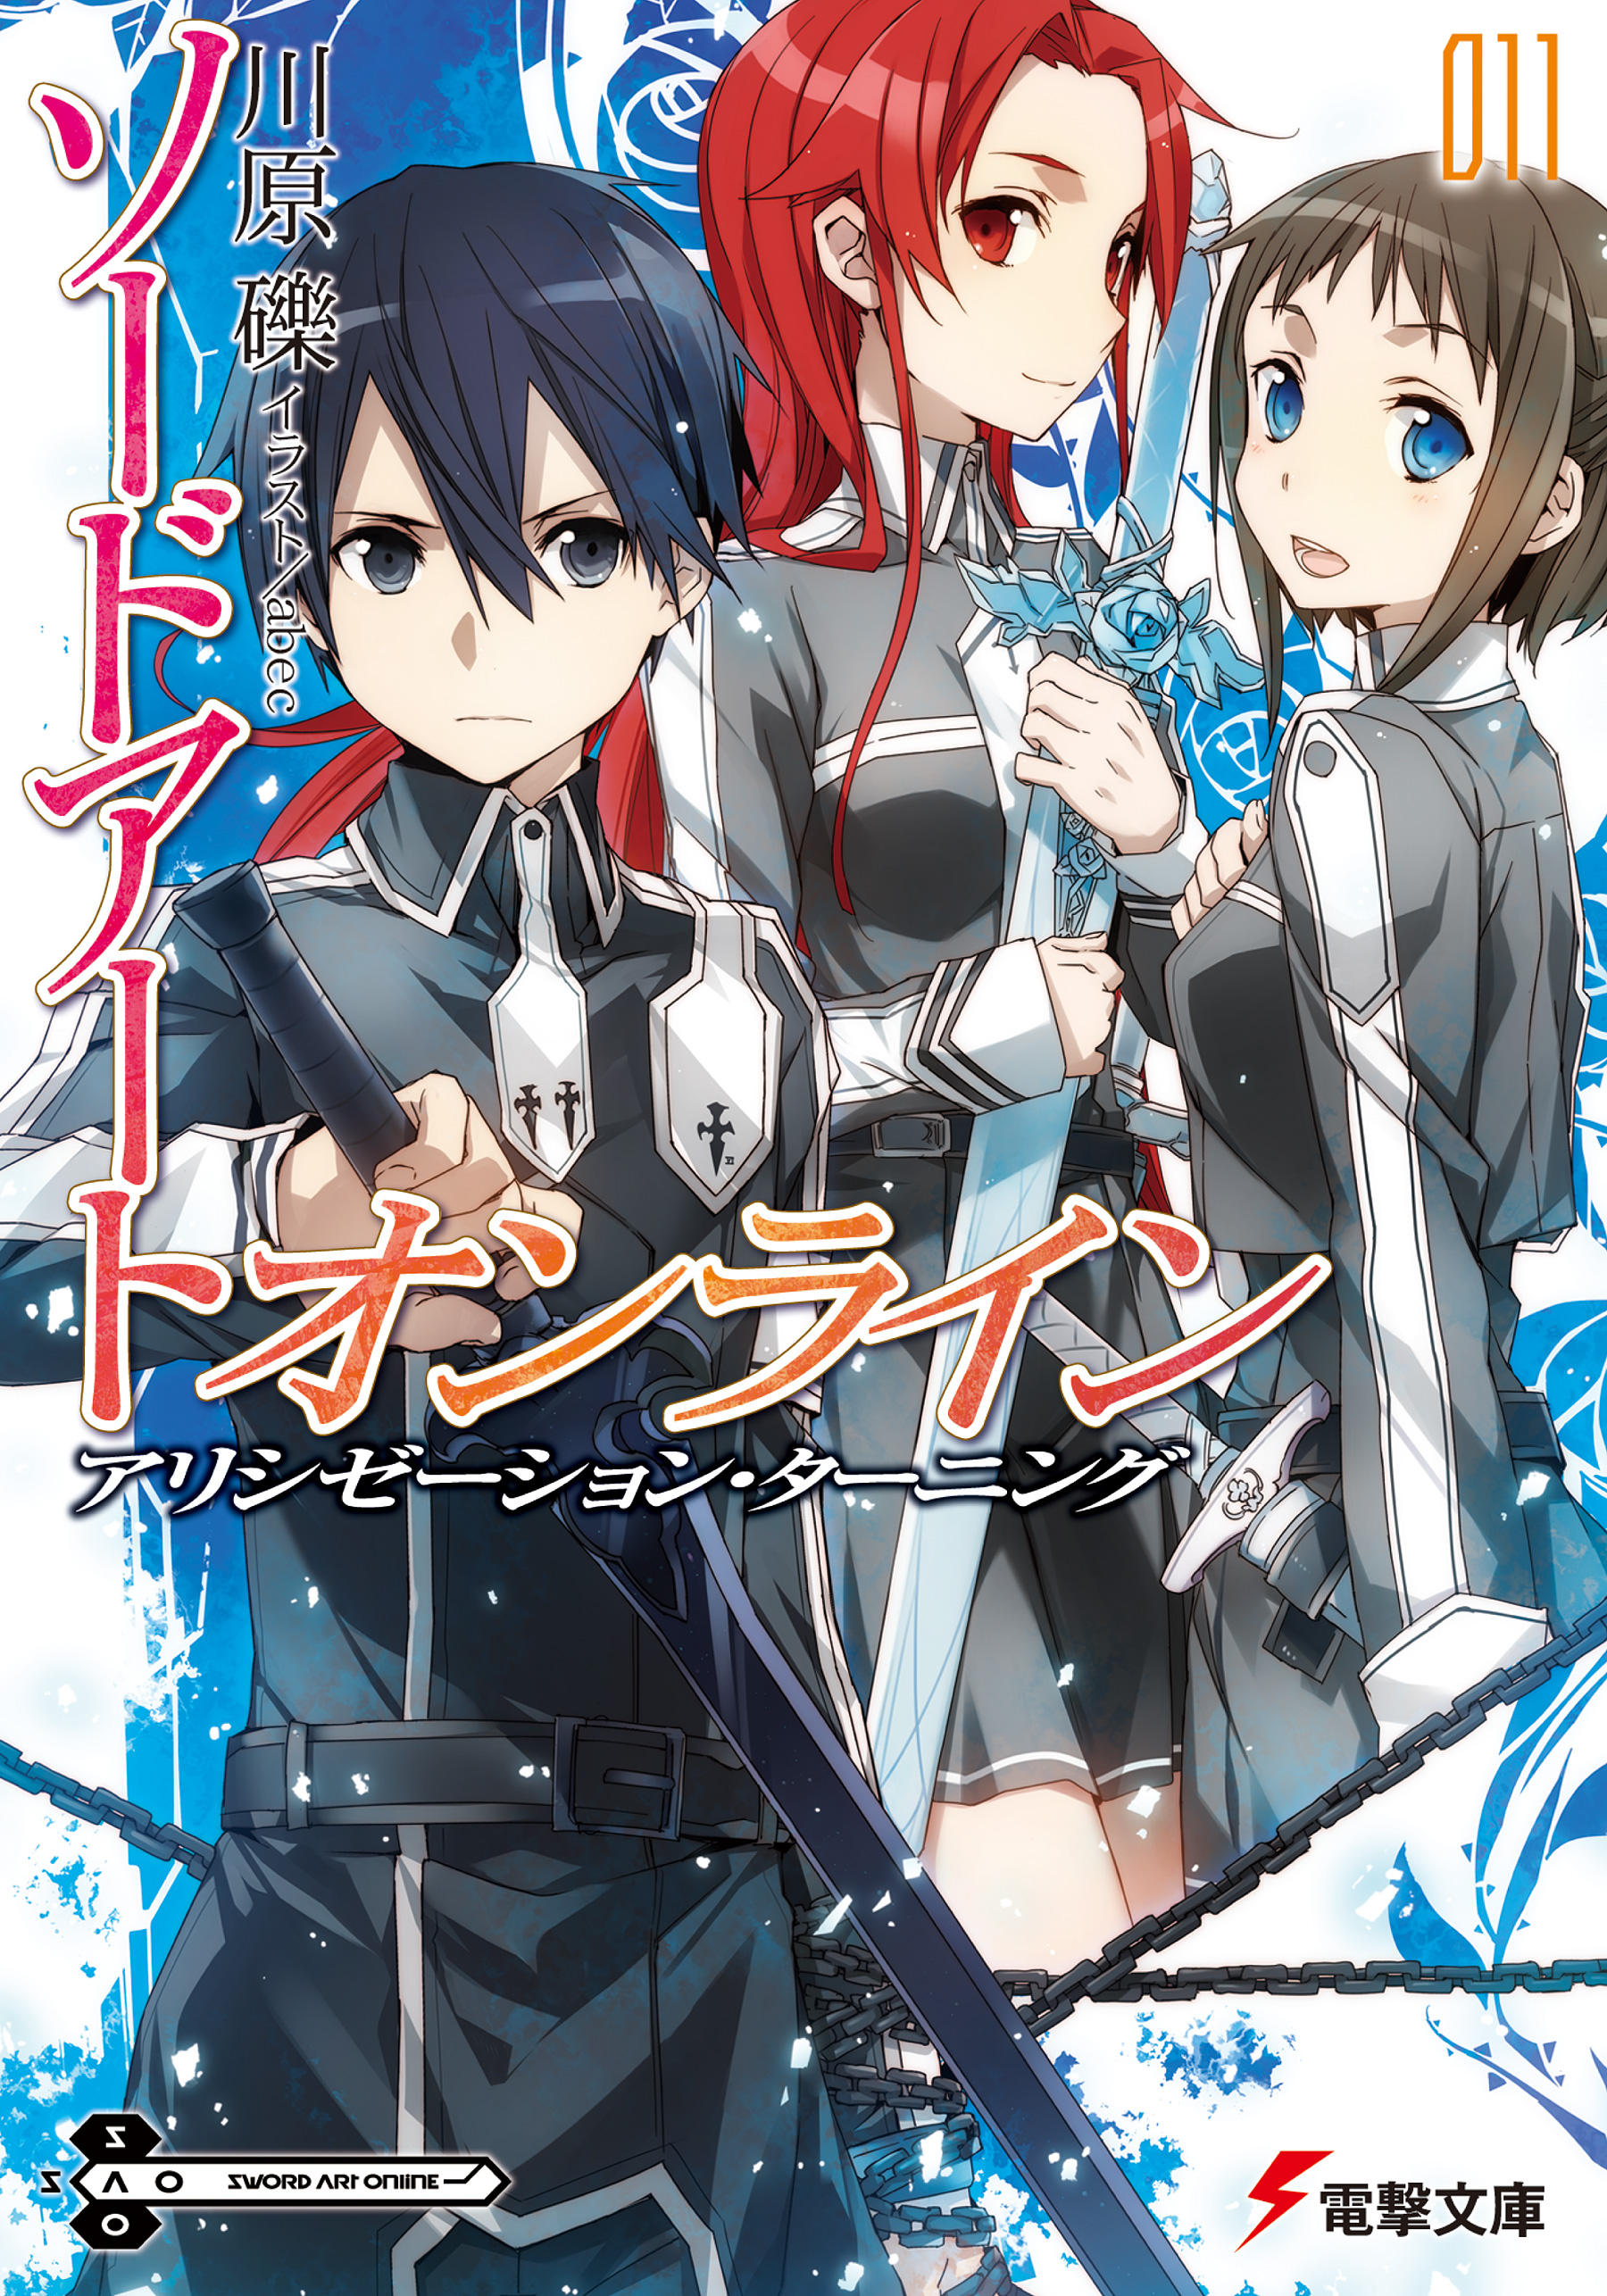 New Sword Art Online: Last Recollection Trailer Introduces 42